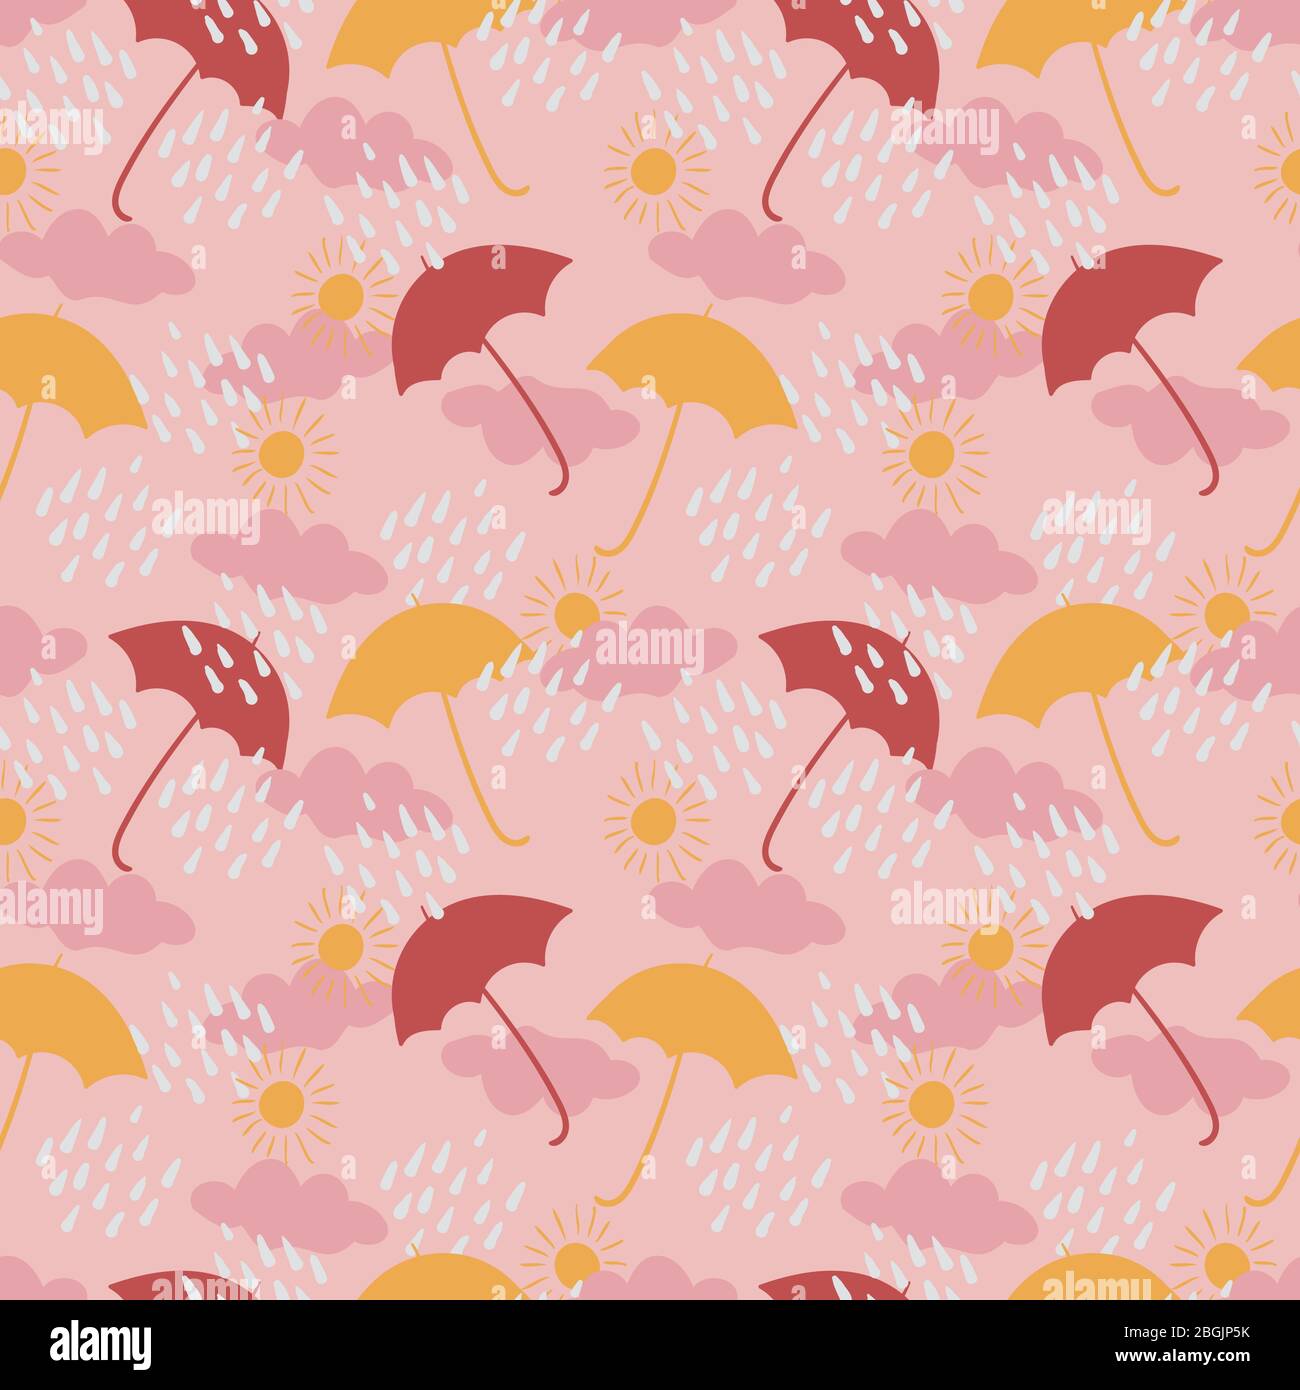 umbrellas, clouds, rain, and suns seamless vector pattern Stock Vector